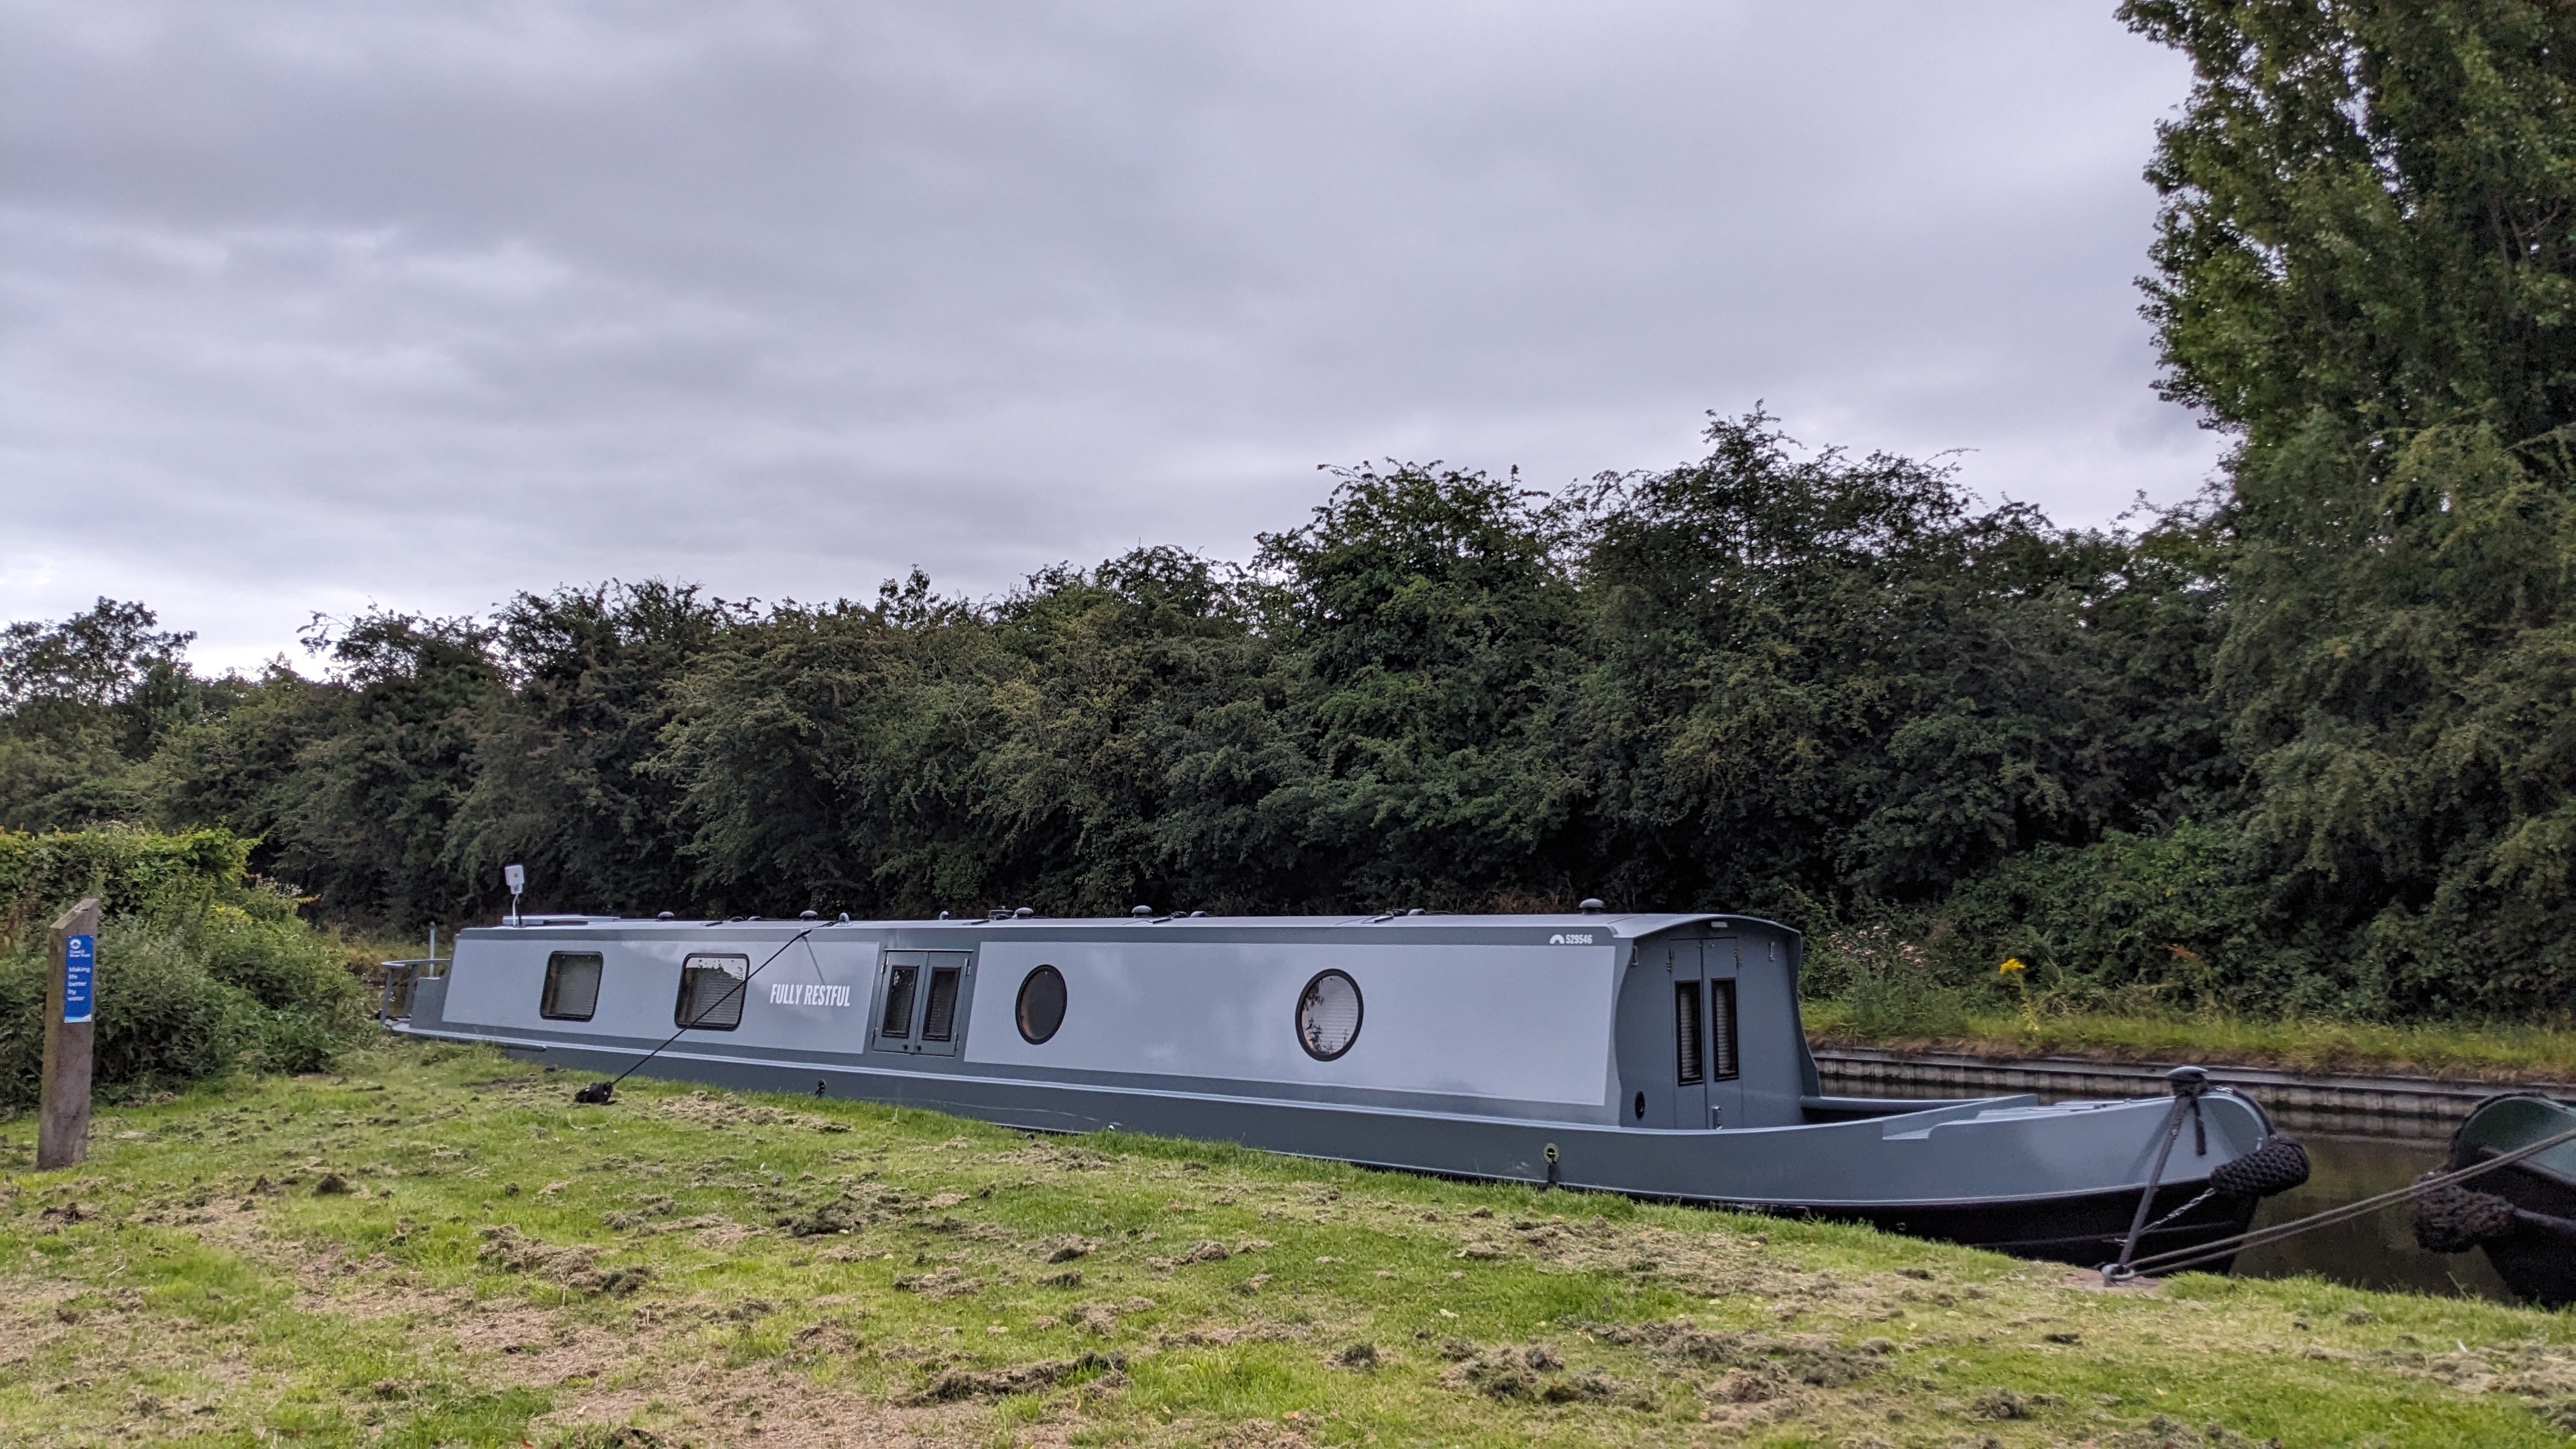 Moored at Shobnall Fields